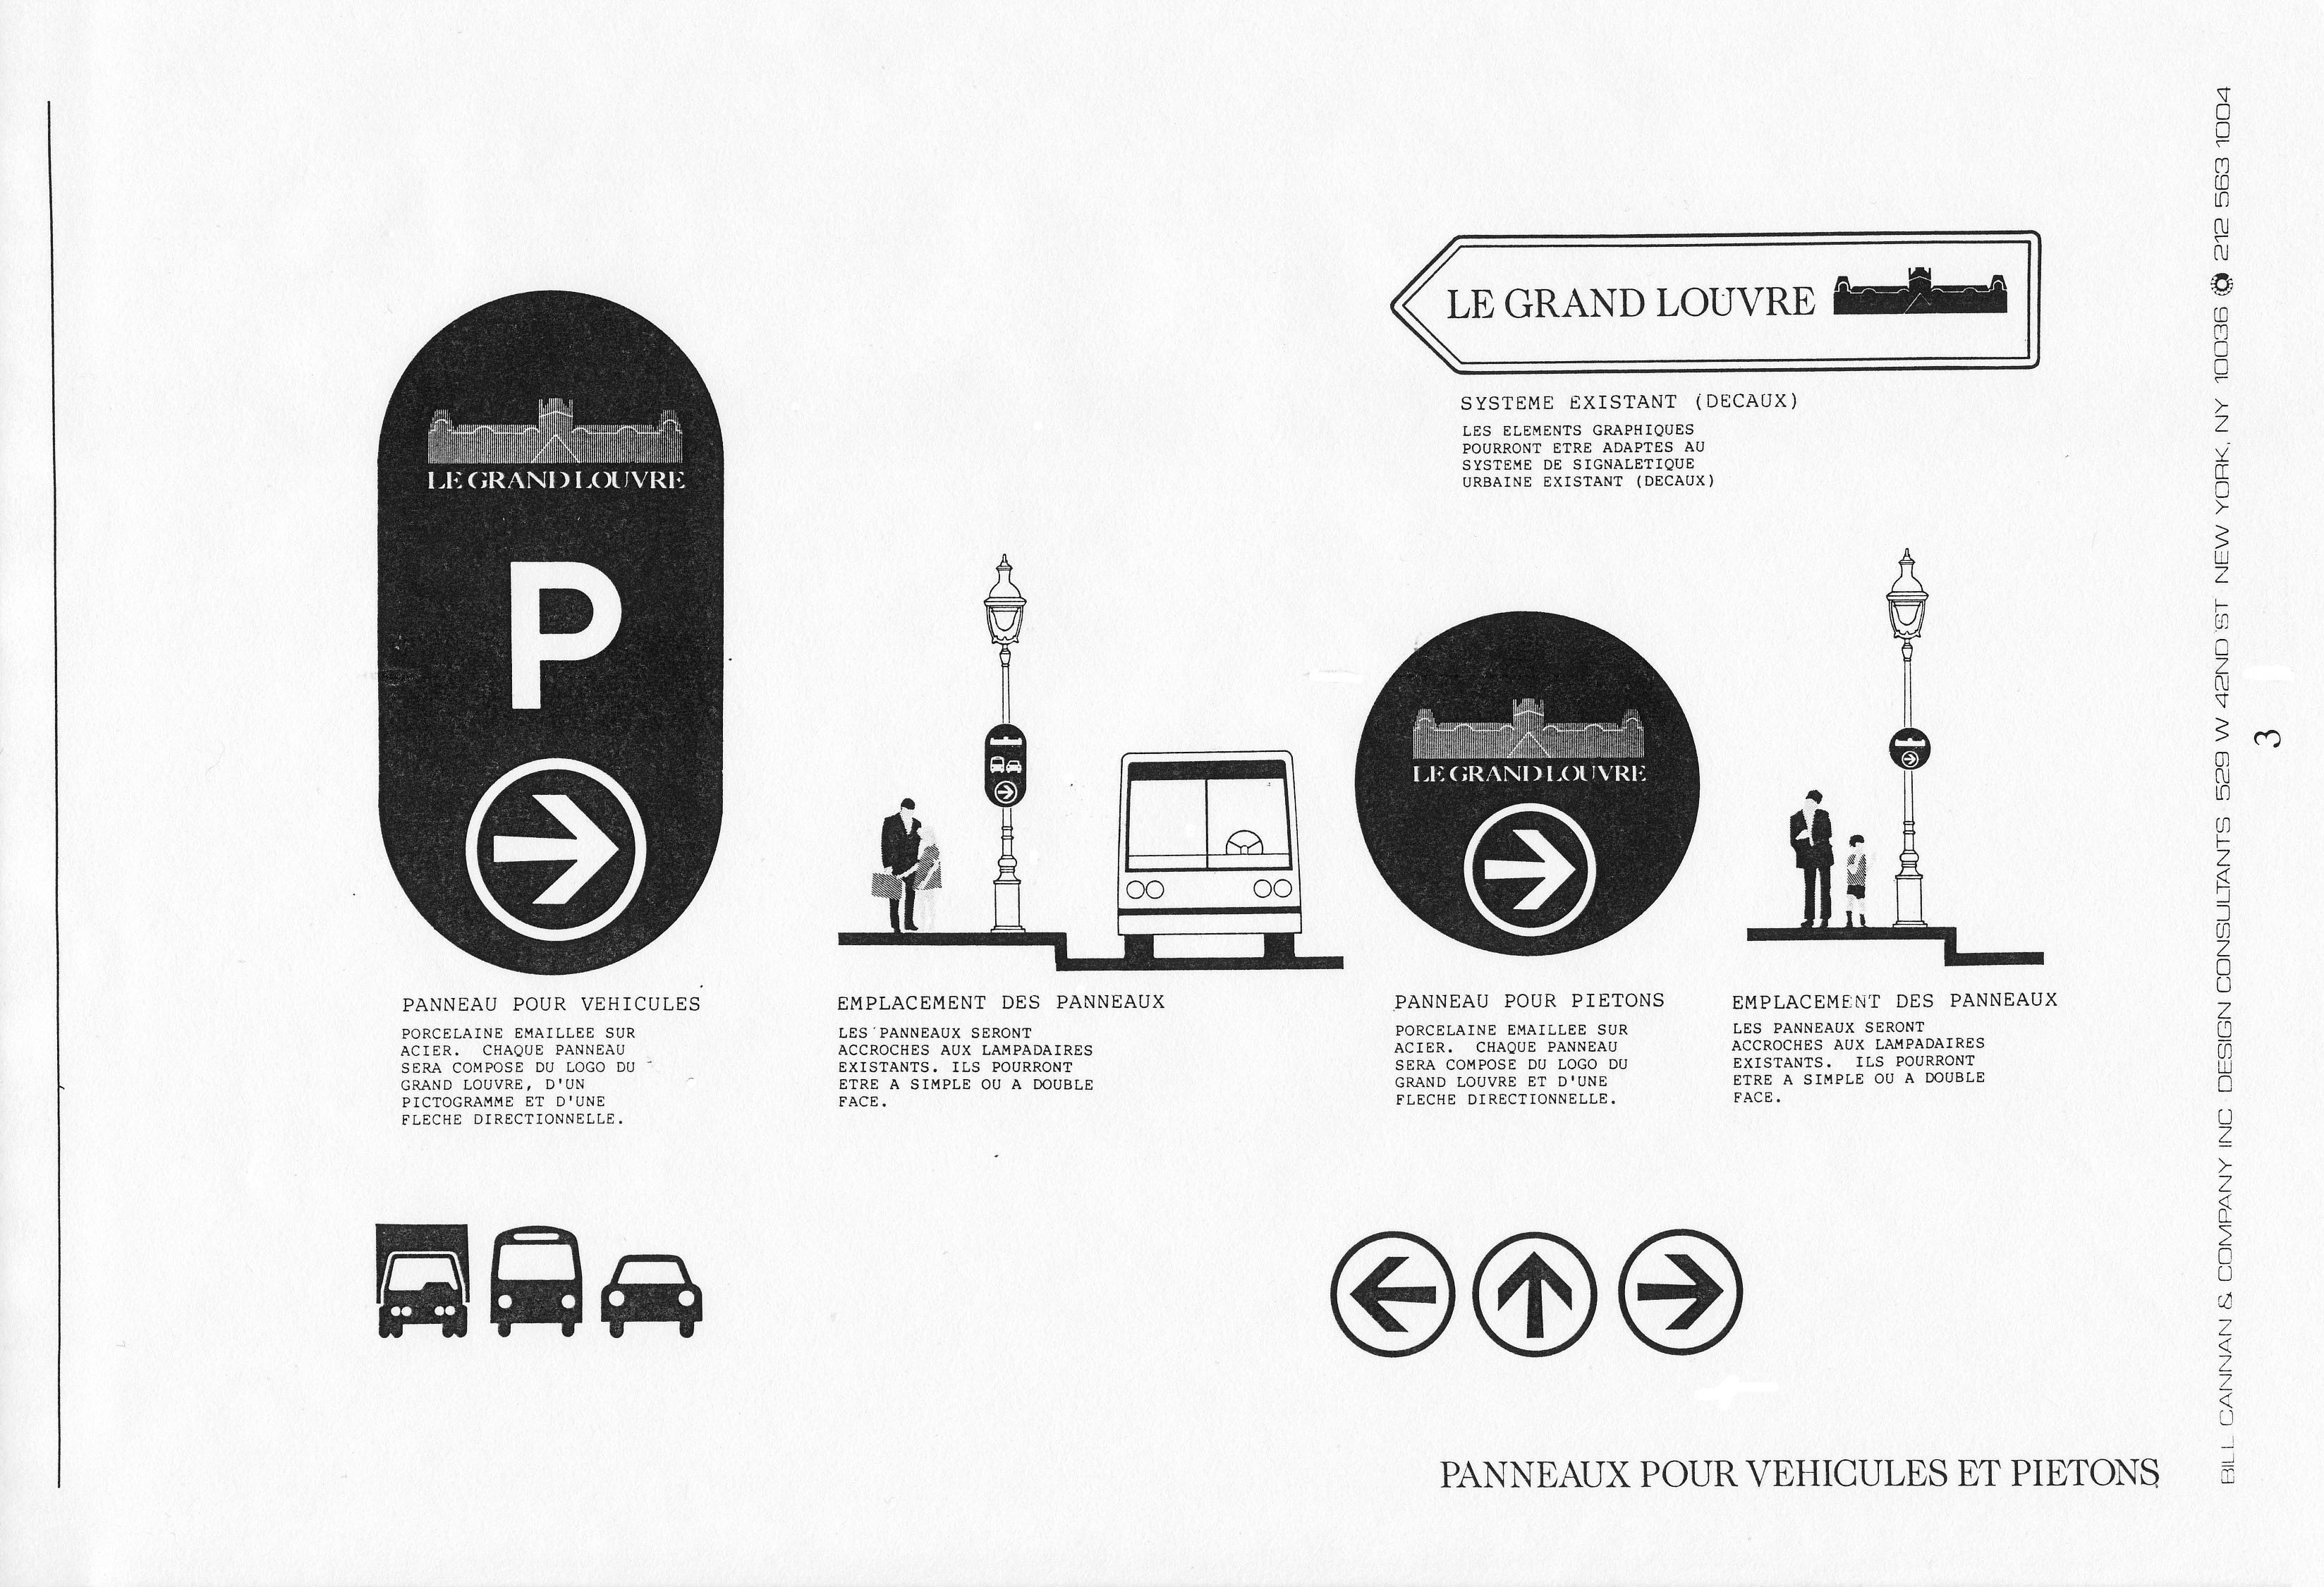 A series of large street signs and how they would look on light posts and next to cars in the street.